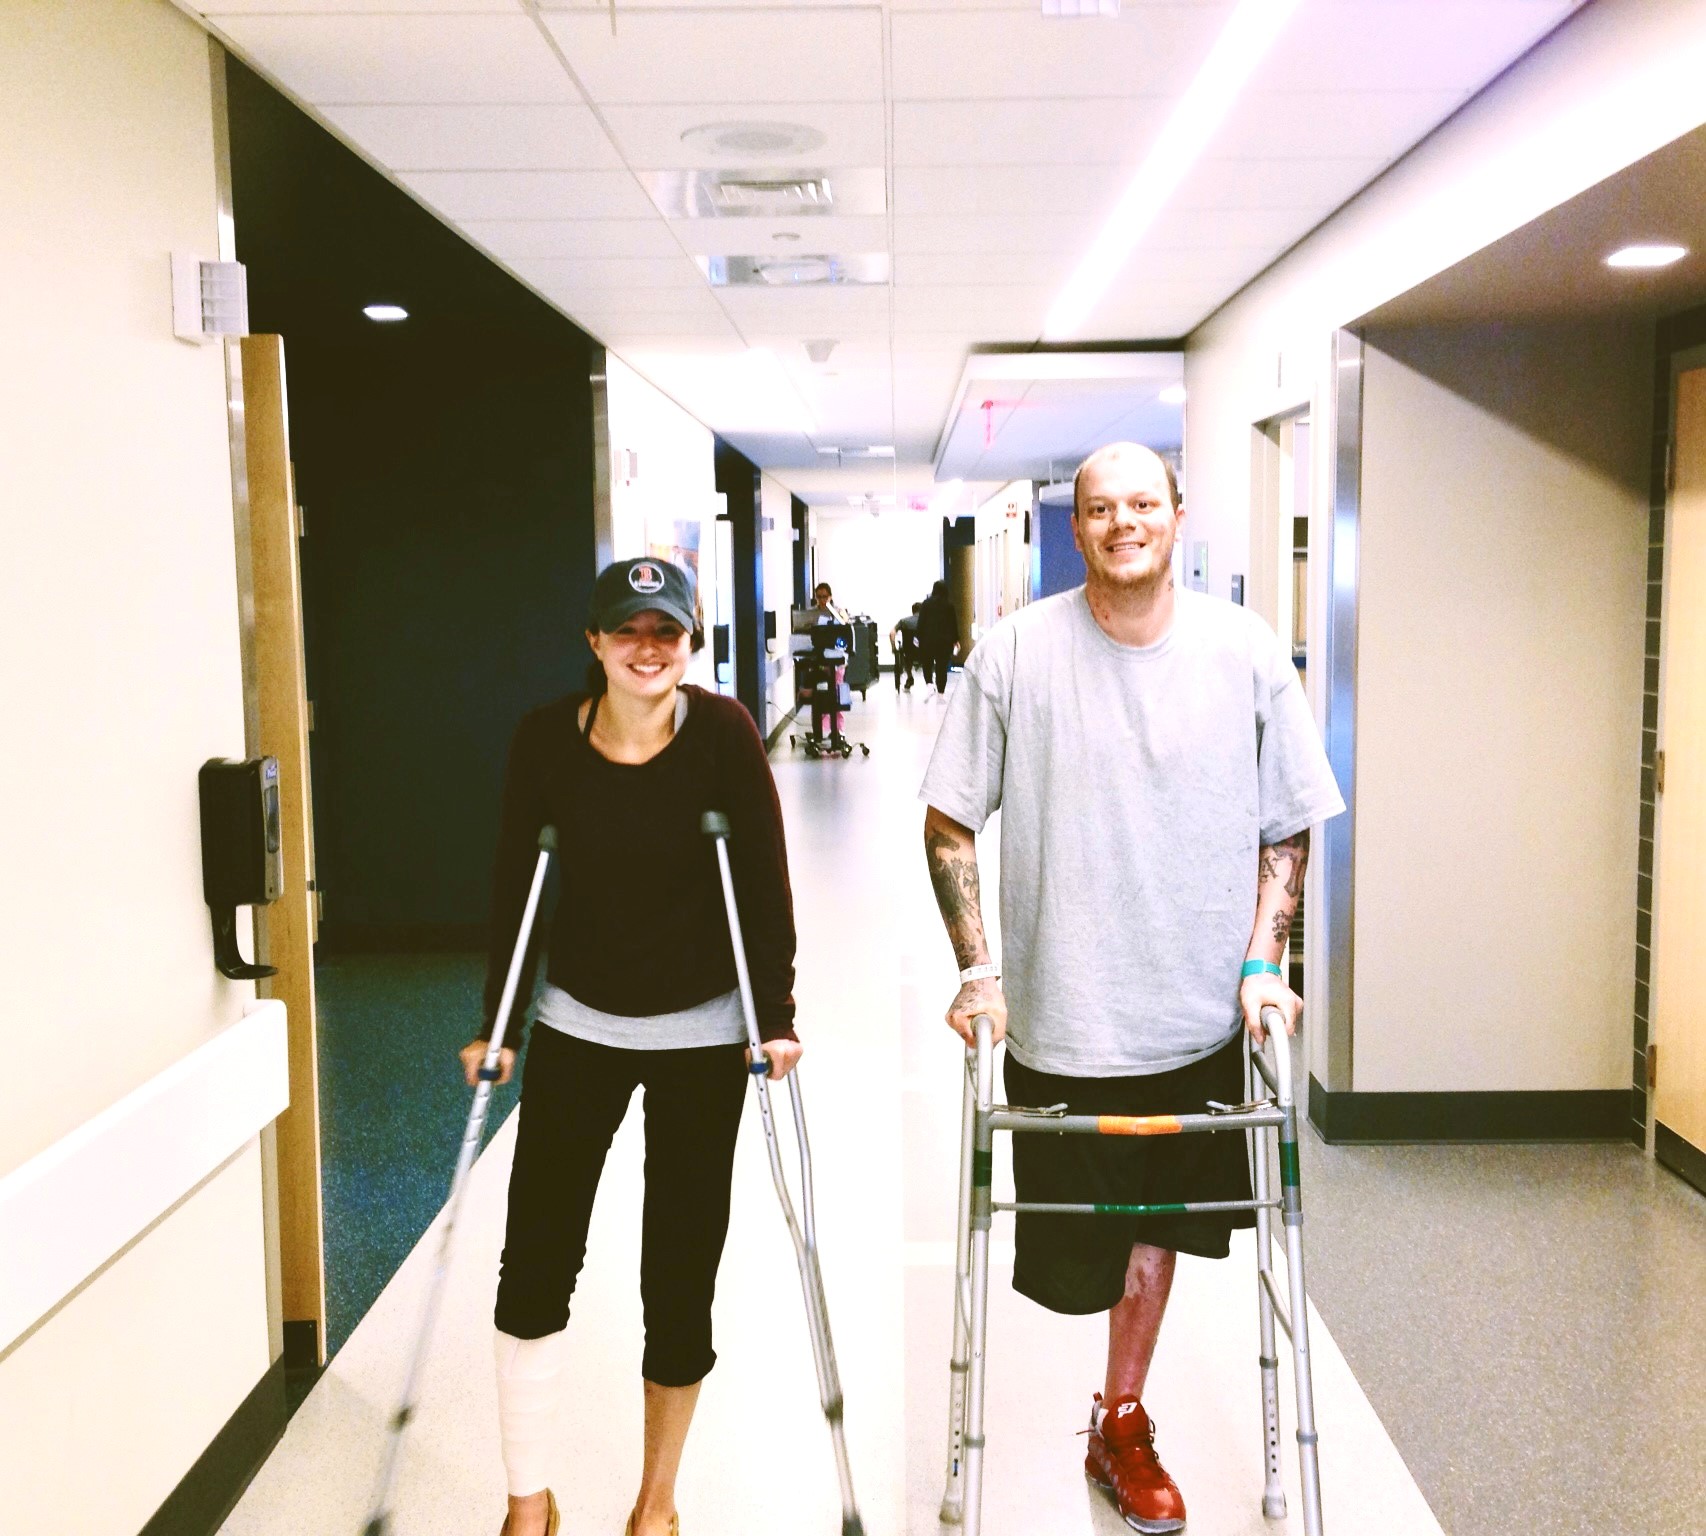 PHOTO: Jacqui Webb and her fiancé Paul Norden are pictured recovering at Tufts Medical Center after the Boston Marathon bombing in 2013.